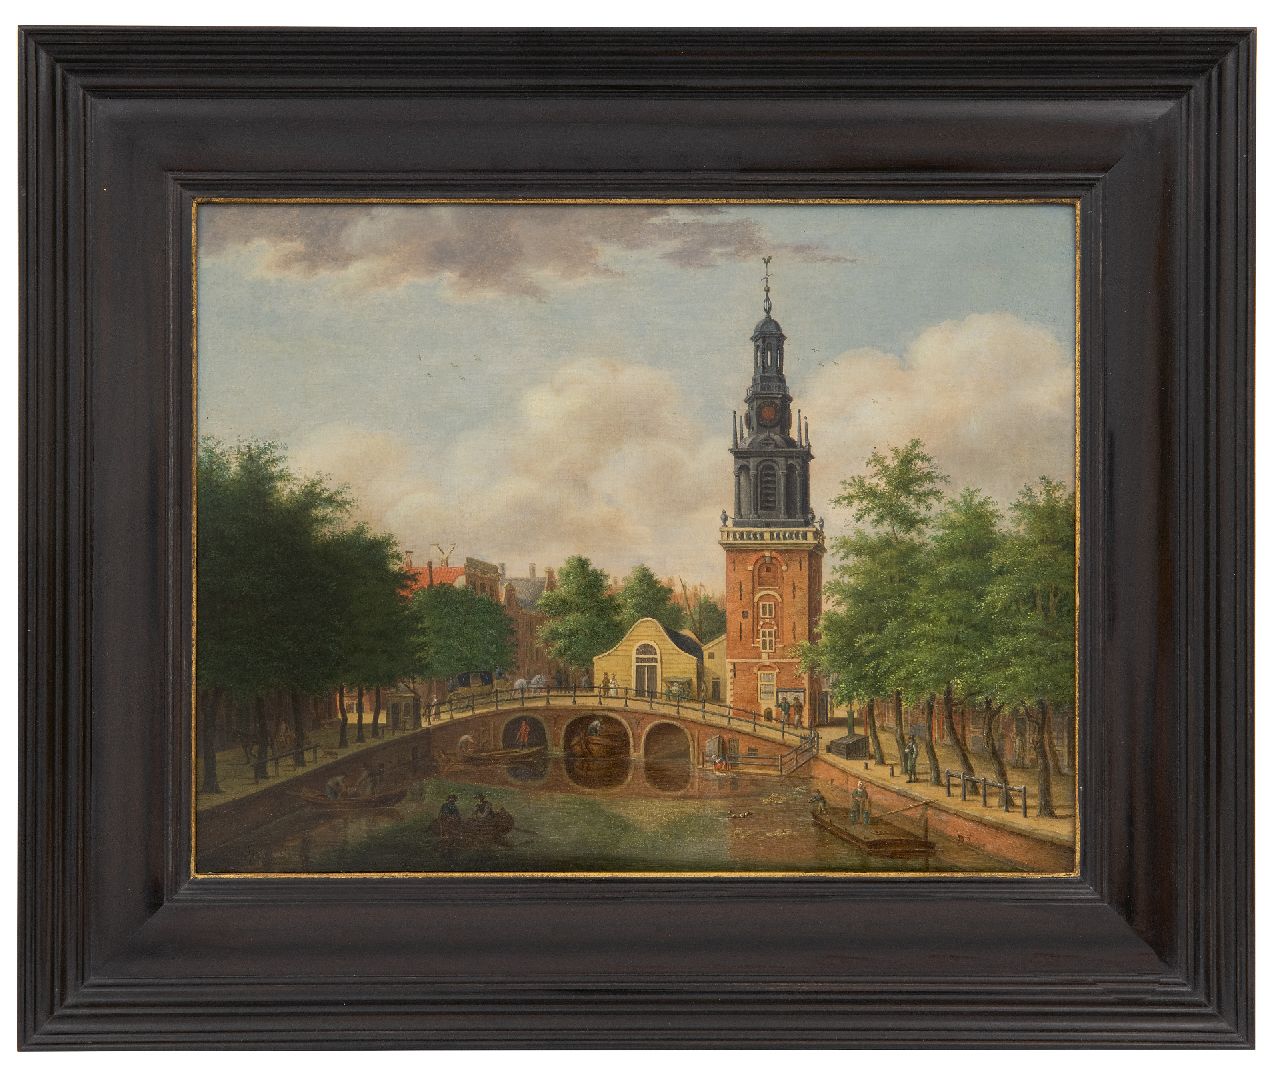 Zijderveld W.  | Willem Zijderveld | Paintings offered for sale | Townscape with canal and tower, oil on panel 25.6 x 33.4 cm, signed l.l. (indistinctly)